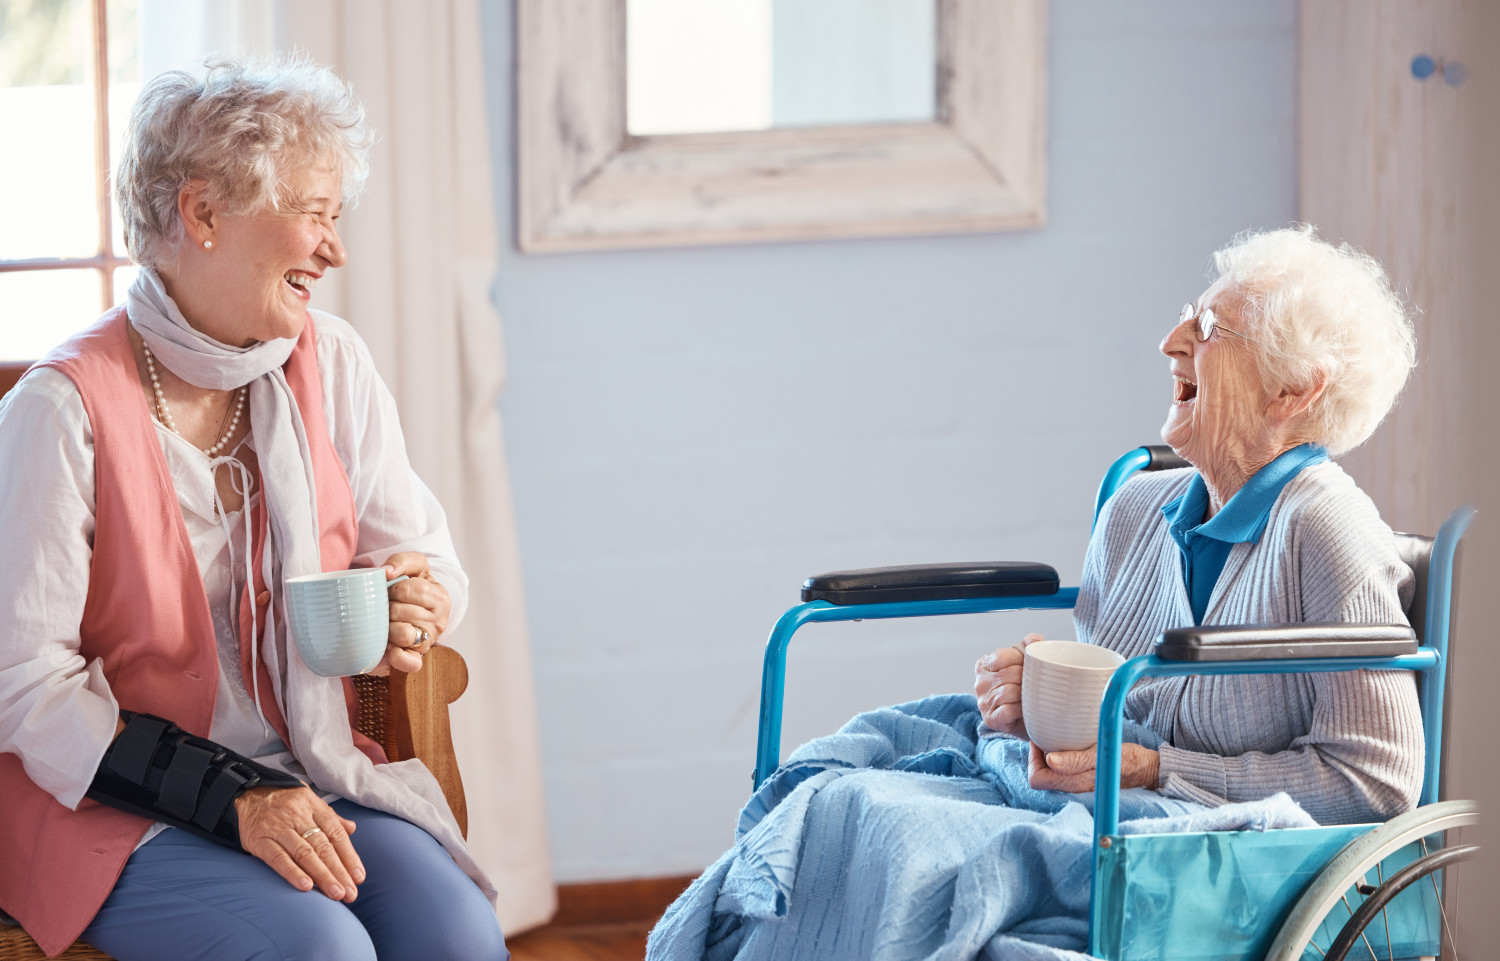 Two senior individuals sharing a laugh over a cup of tea in a respite care setting, showing the social opportunities available in respite care environments.